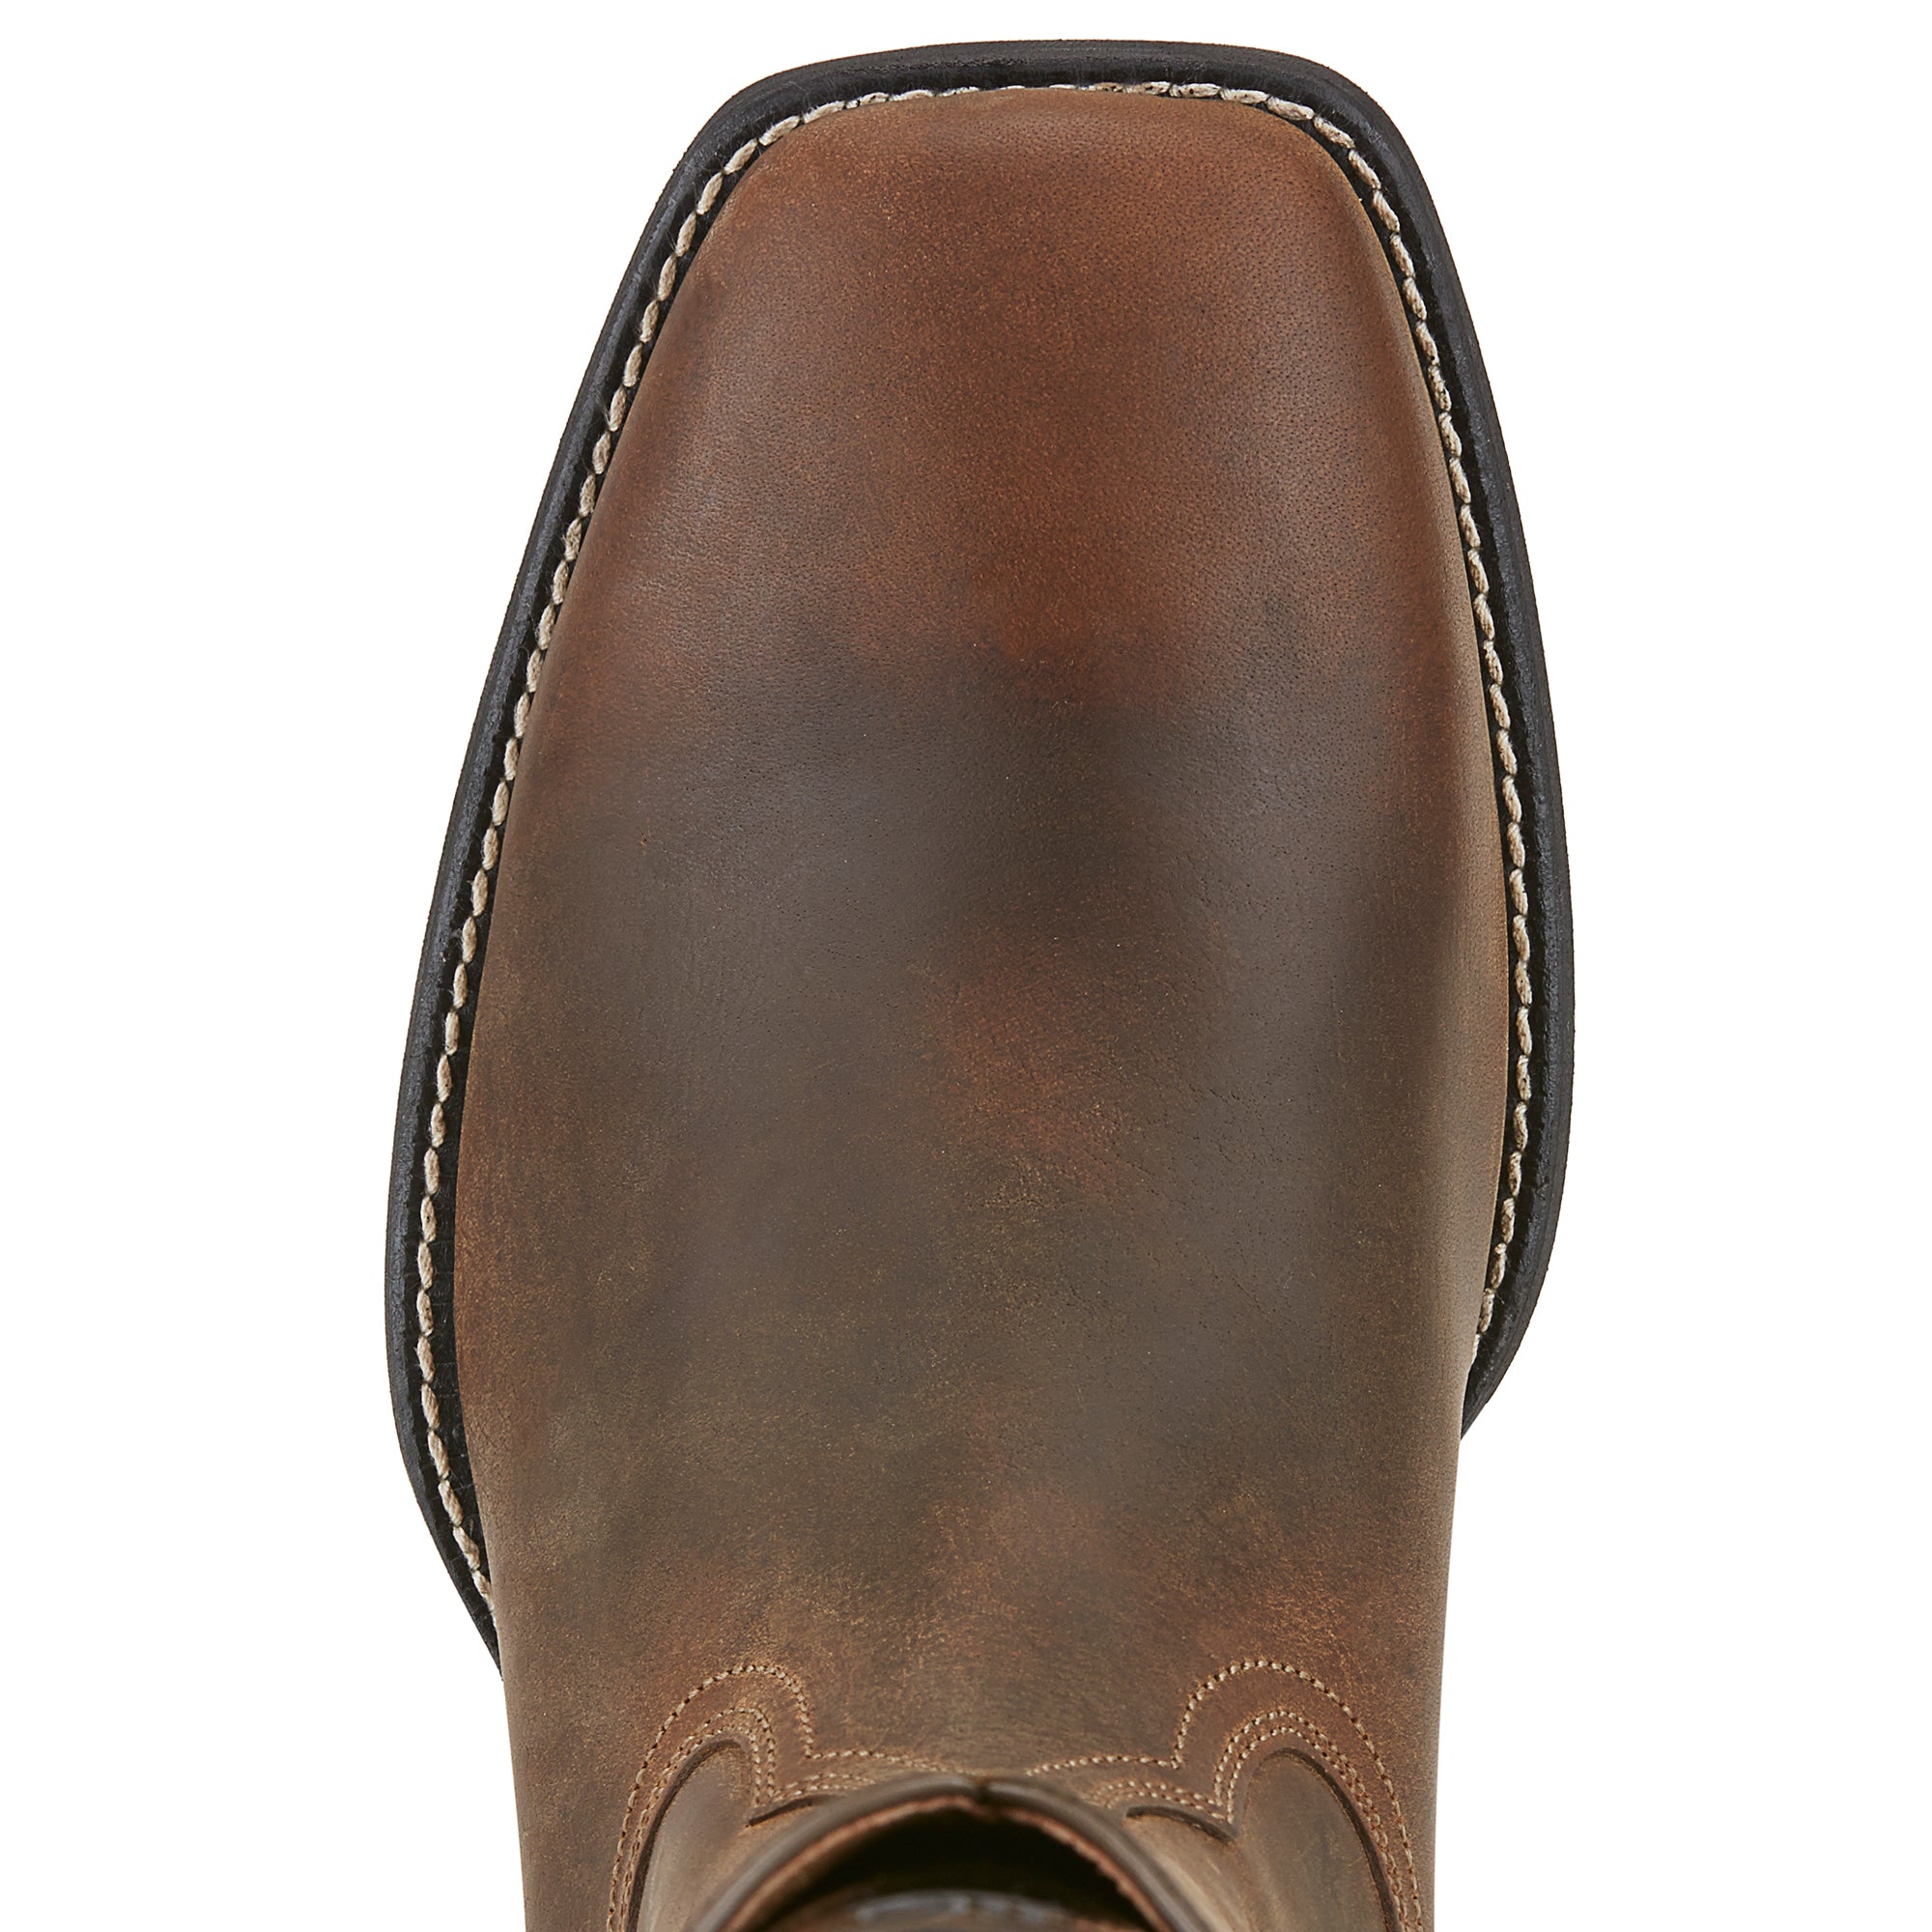 Ariat Mens Heritage Roper Wide Square Toe Boots